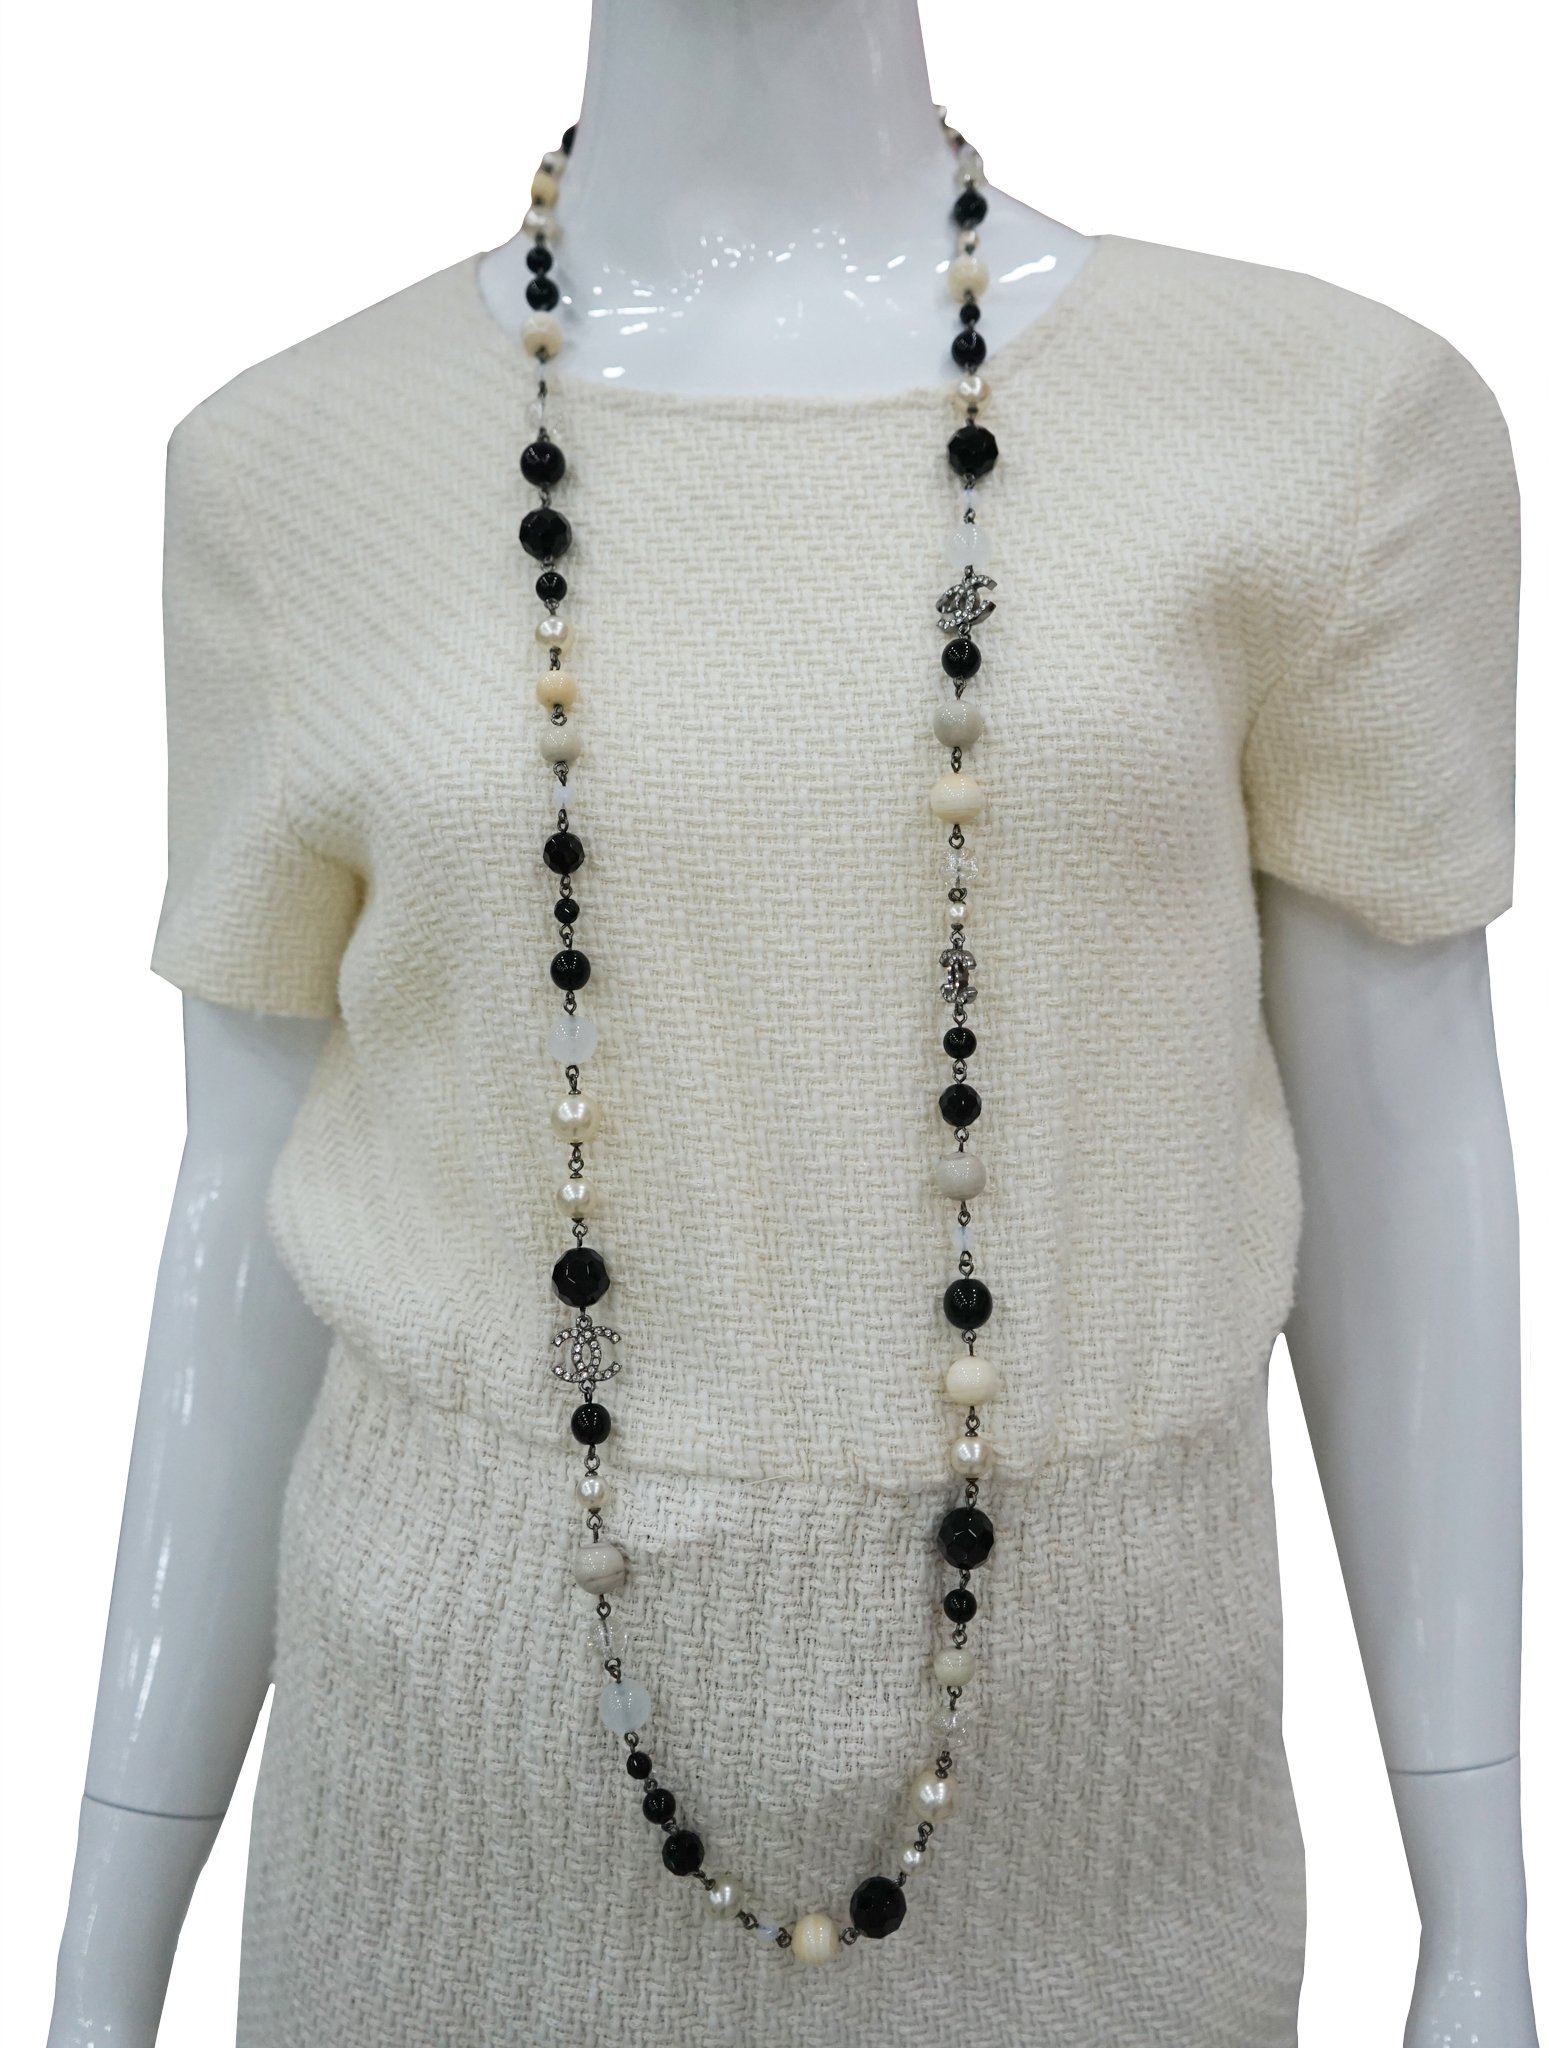 CC PEARLS BLACK BEADS LONG NECKLACE - styleforless